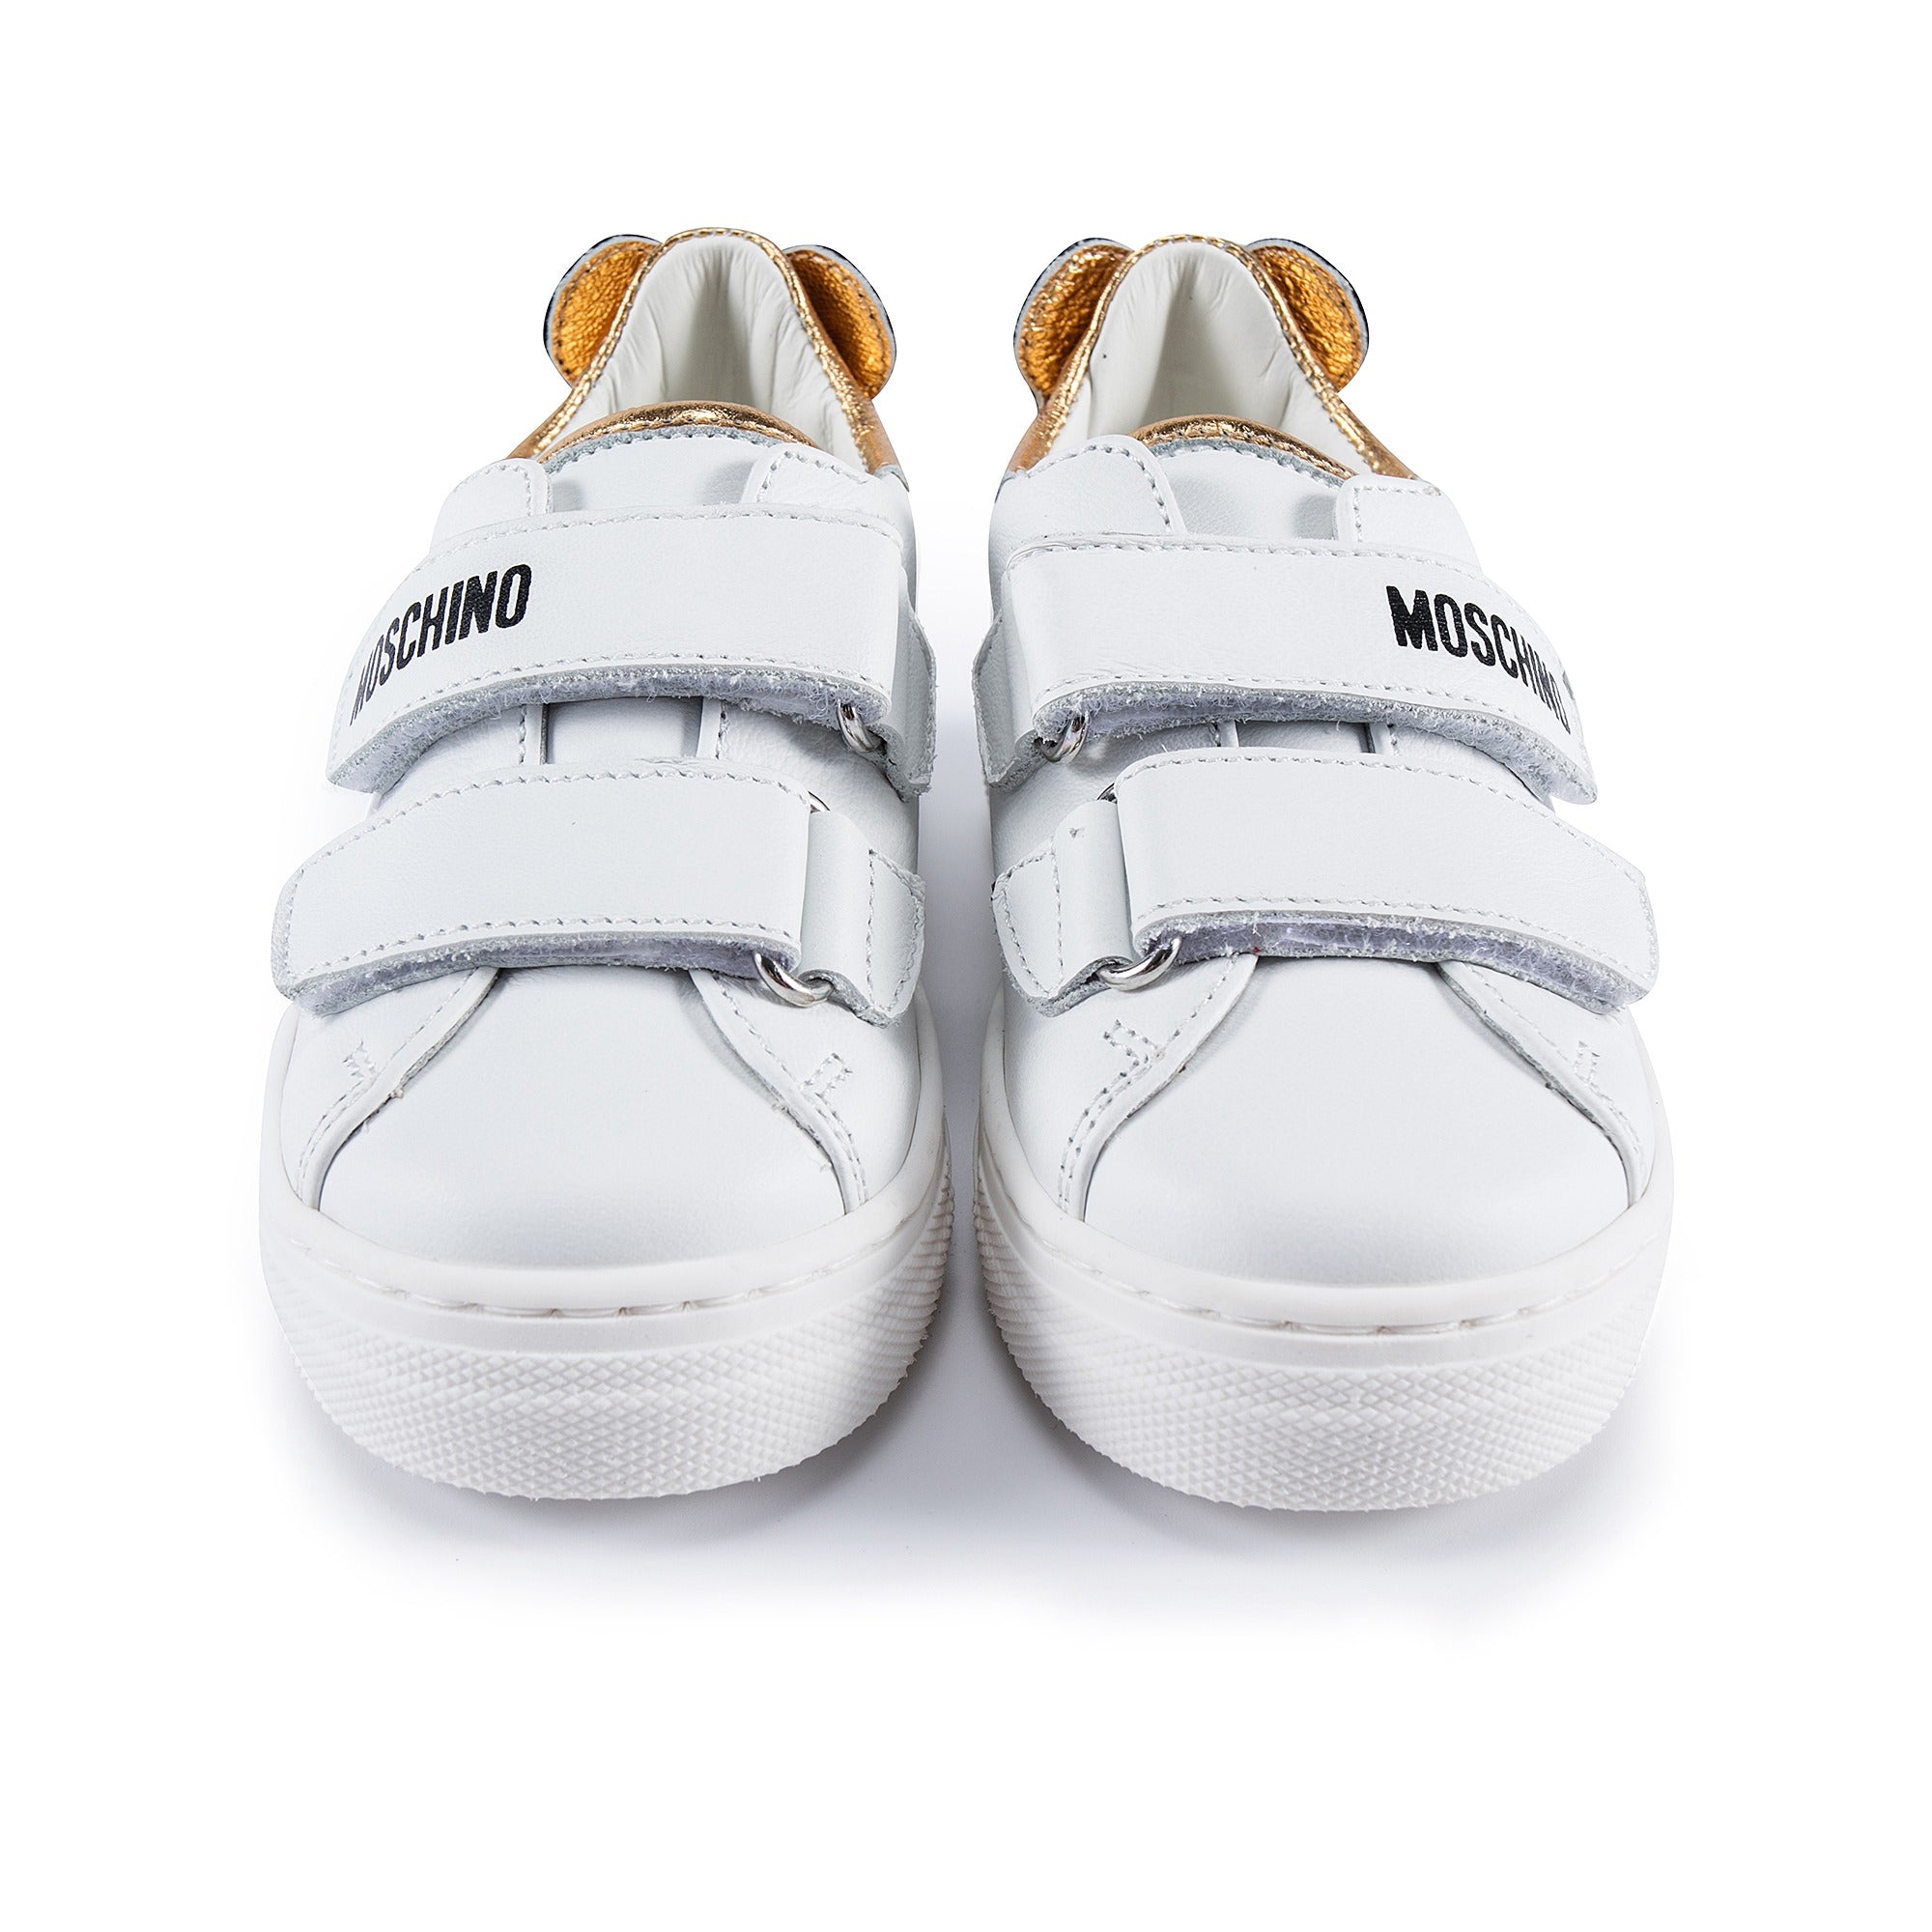 Boys & Girls Gold Patch Teddy Sneakers